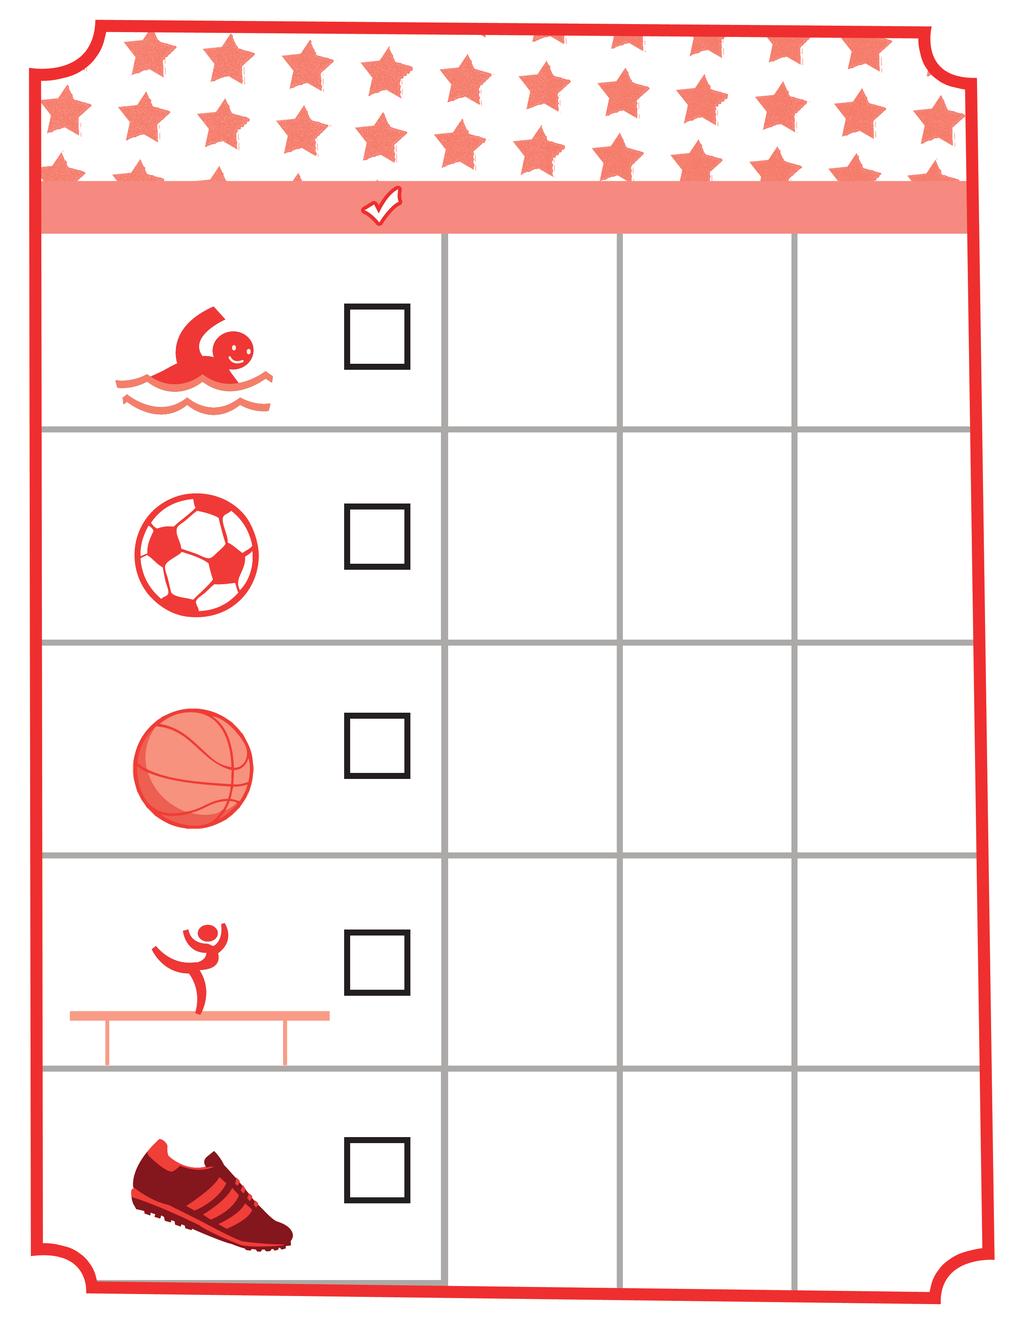 FAMILY OLYMPICS CHECKLIST Here's a checklist of fun outdoor activities your whole family can do this summer see how many you can do before the Olympics are over.